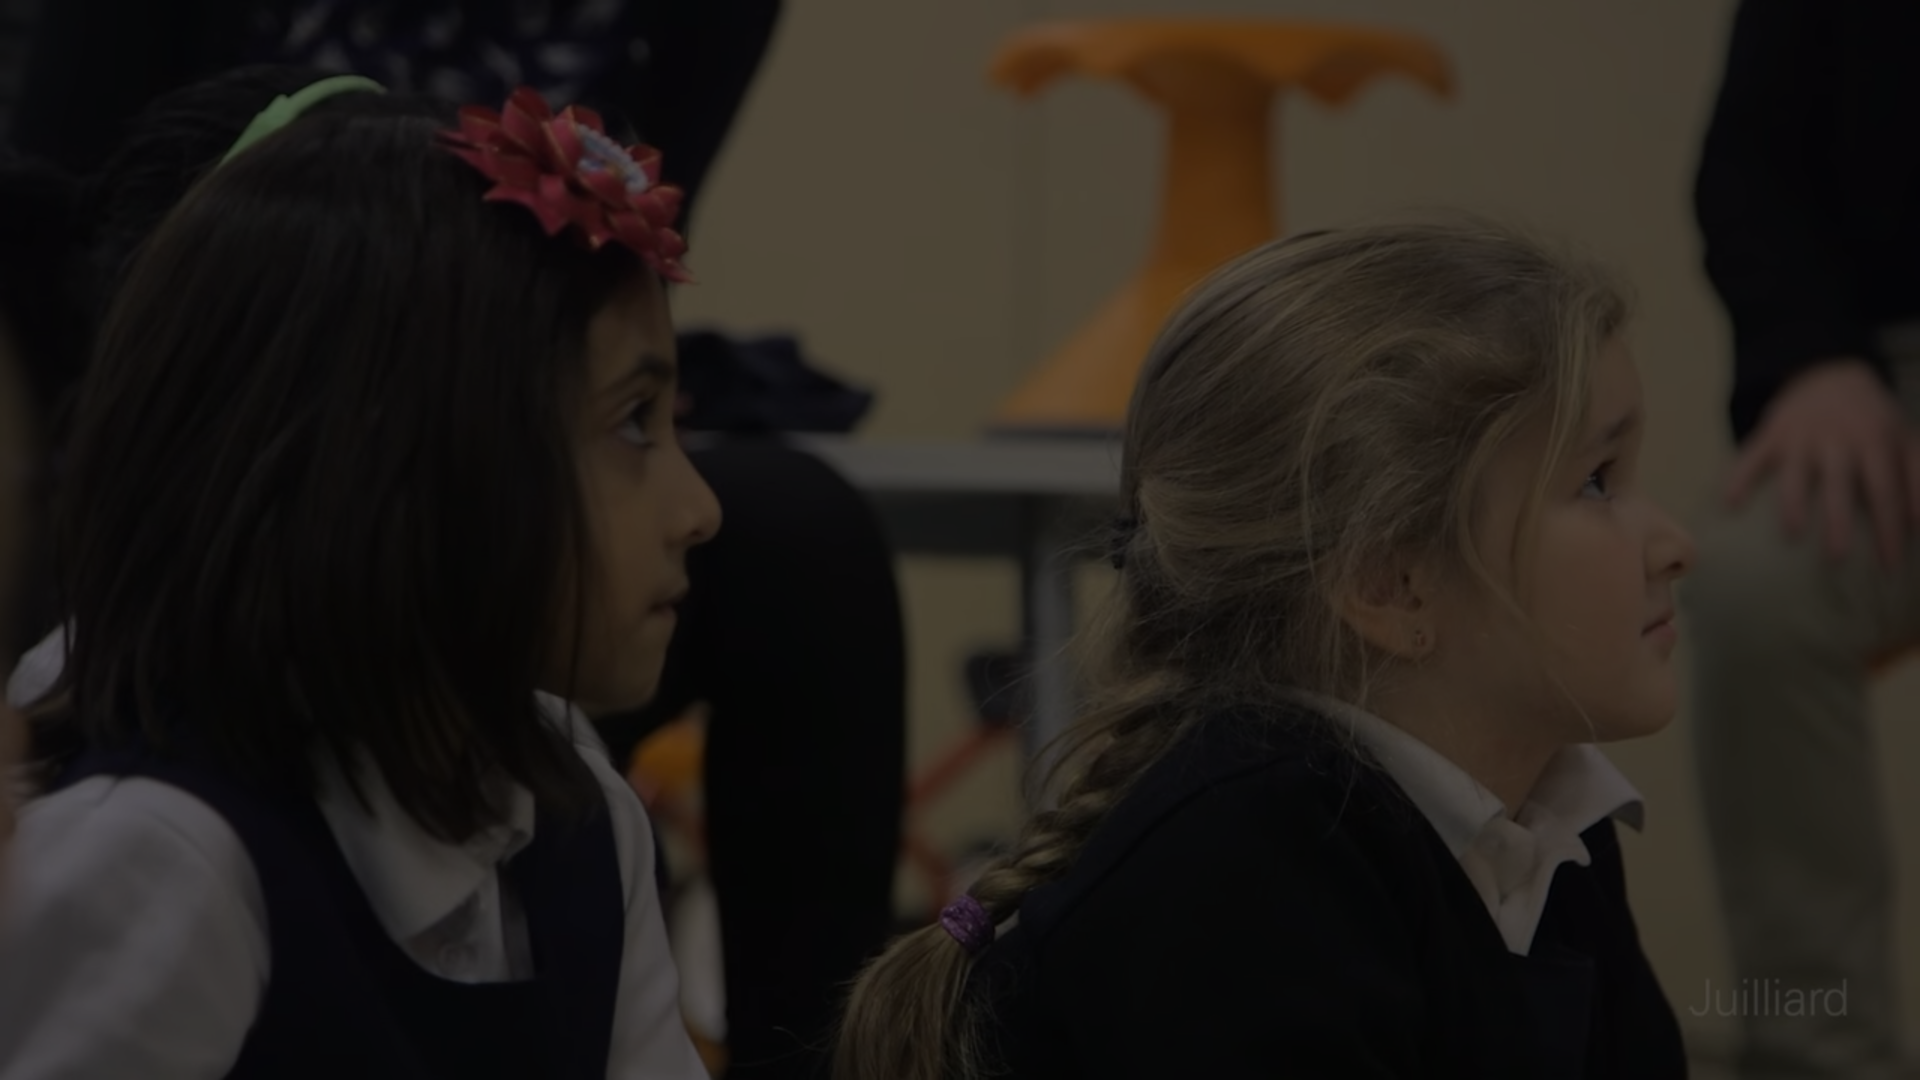 Video profile of the Juilliard School and Nord Anglia Education's Chicago programs